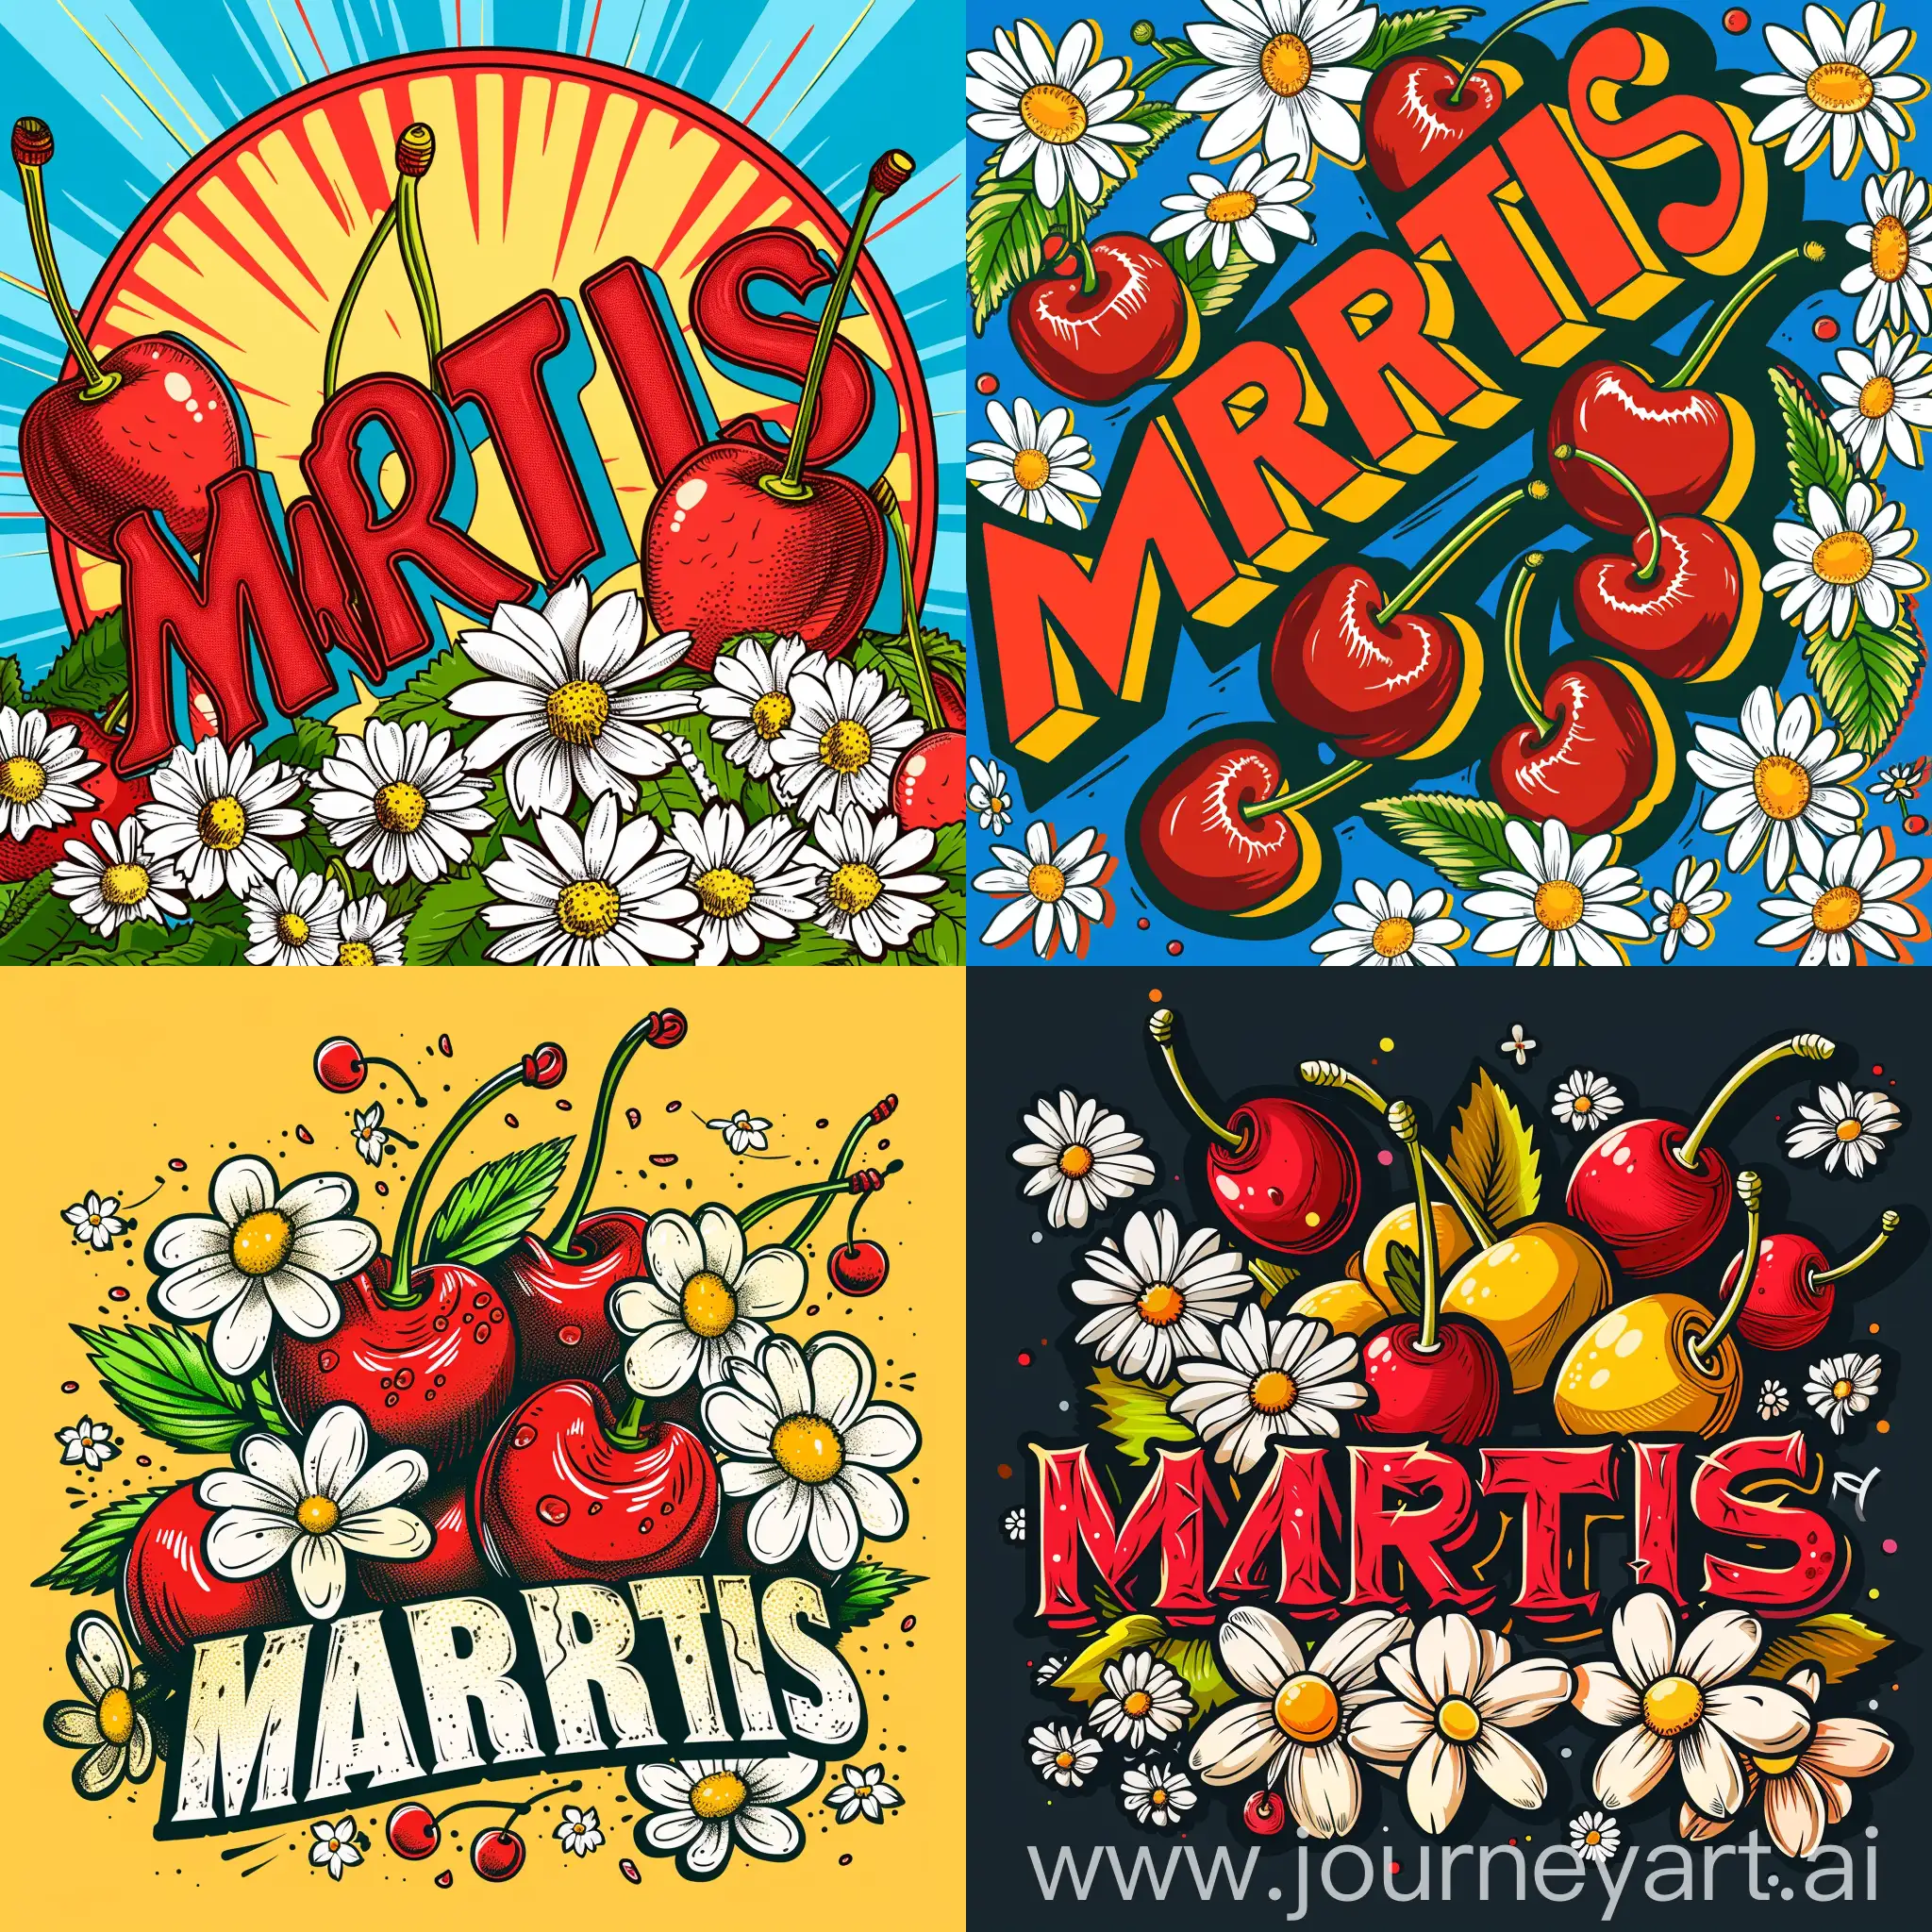 A pop art style bright colored logo of MARTIS written in English with cherries and daisies, ensuring proper spelling and readability.